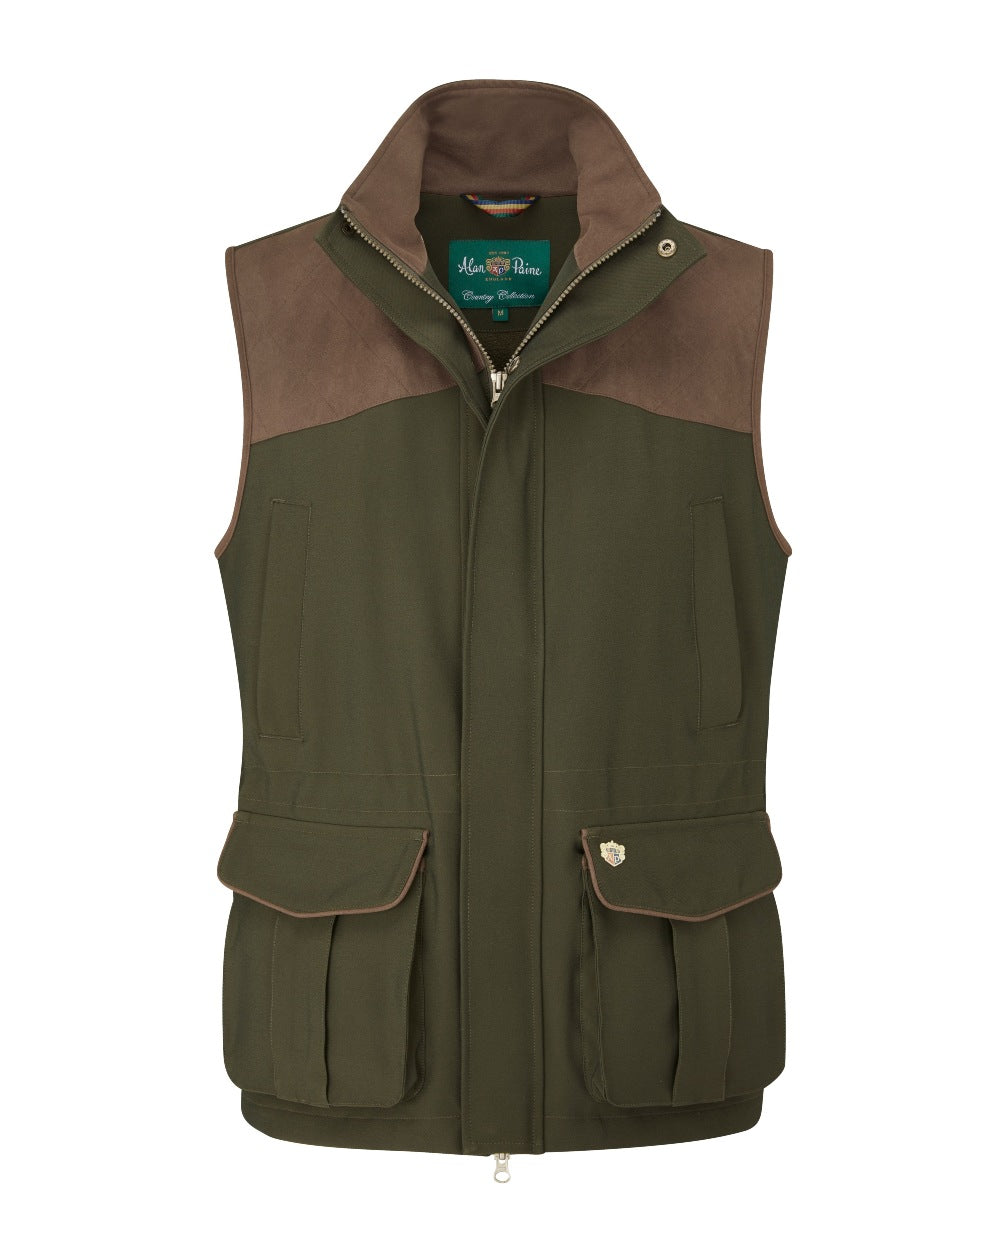 Alan Paine Stancomb Waistcoat in Olive